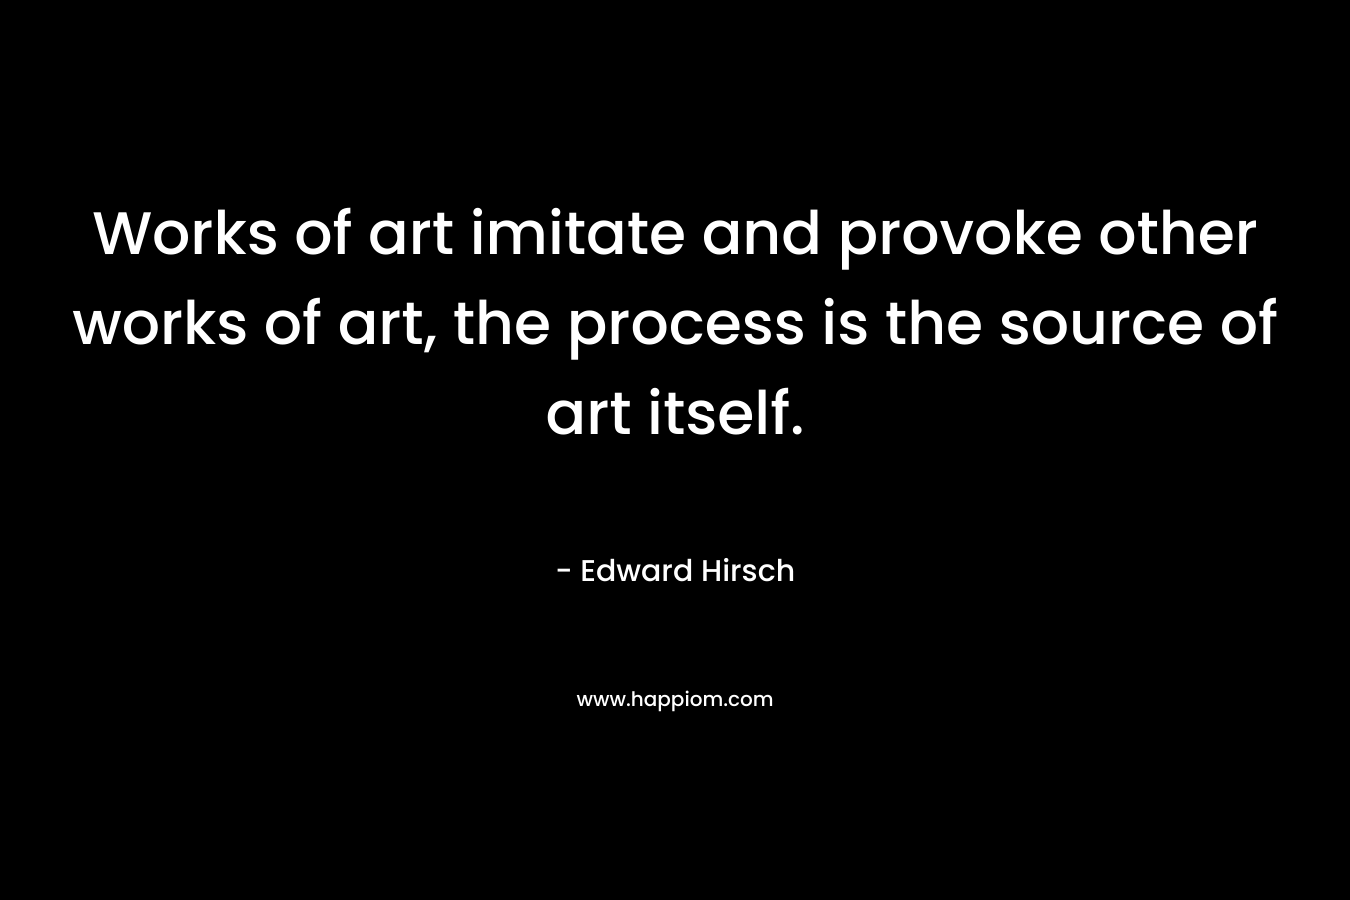 Works of art imitate and provoke other works of art, the process is the source of art itself. – Edward Hirsch